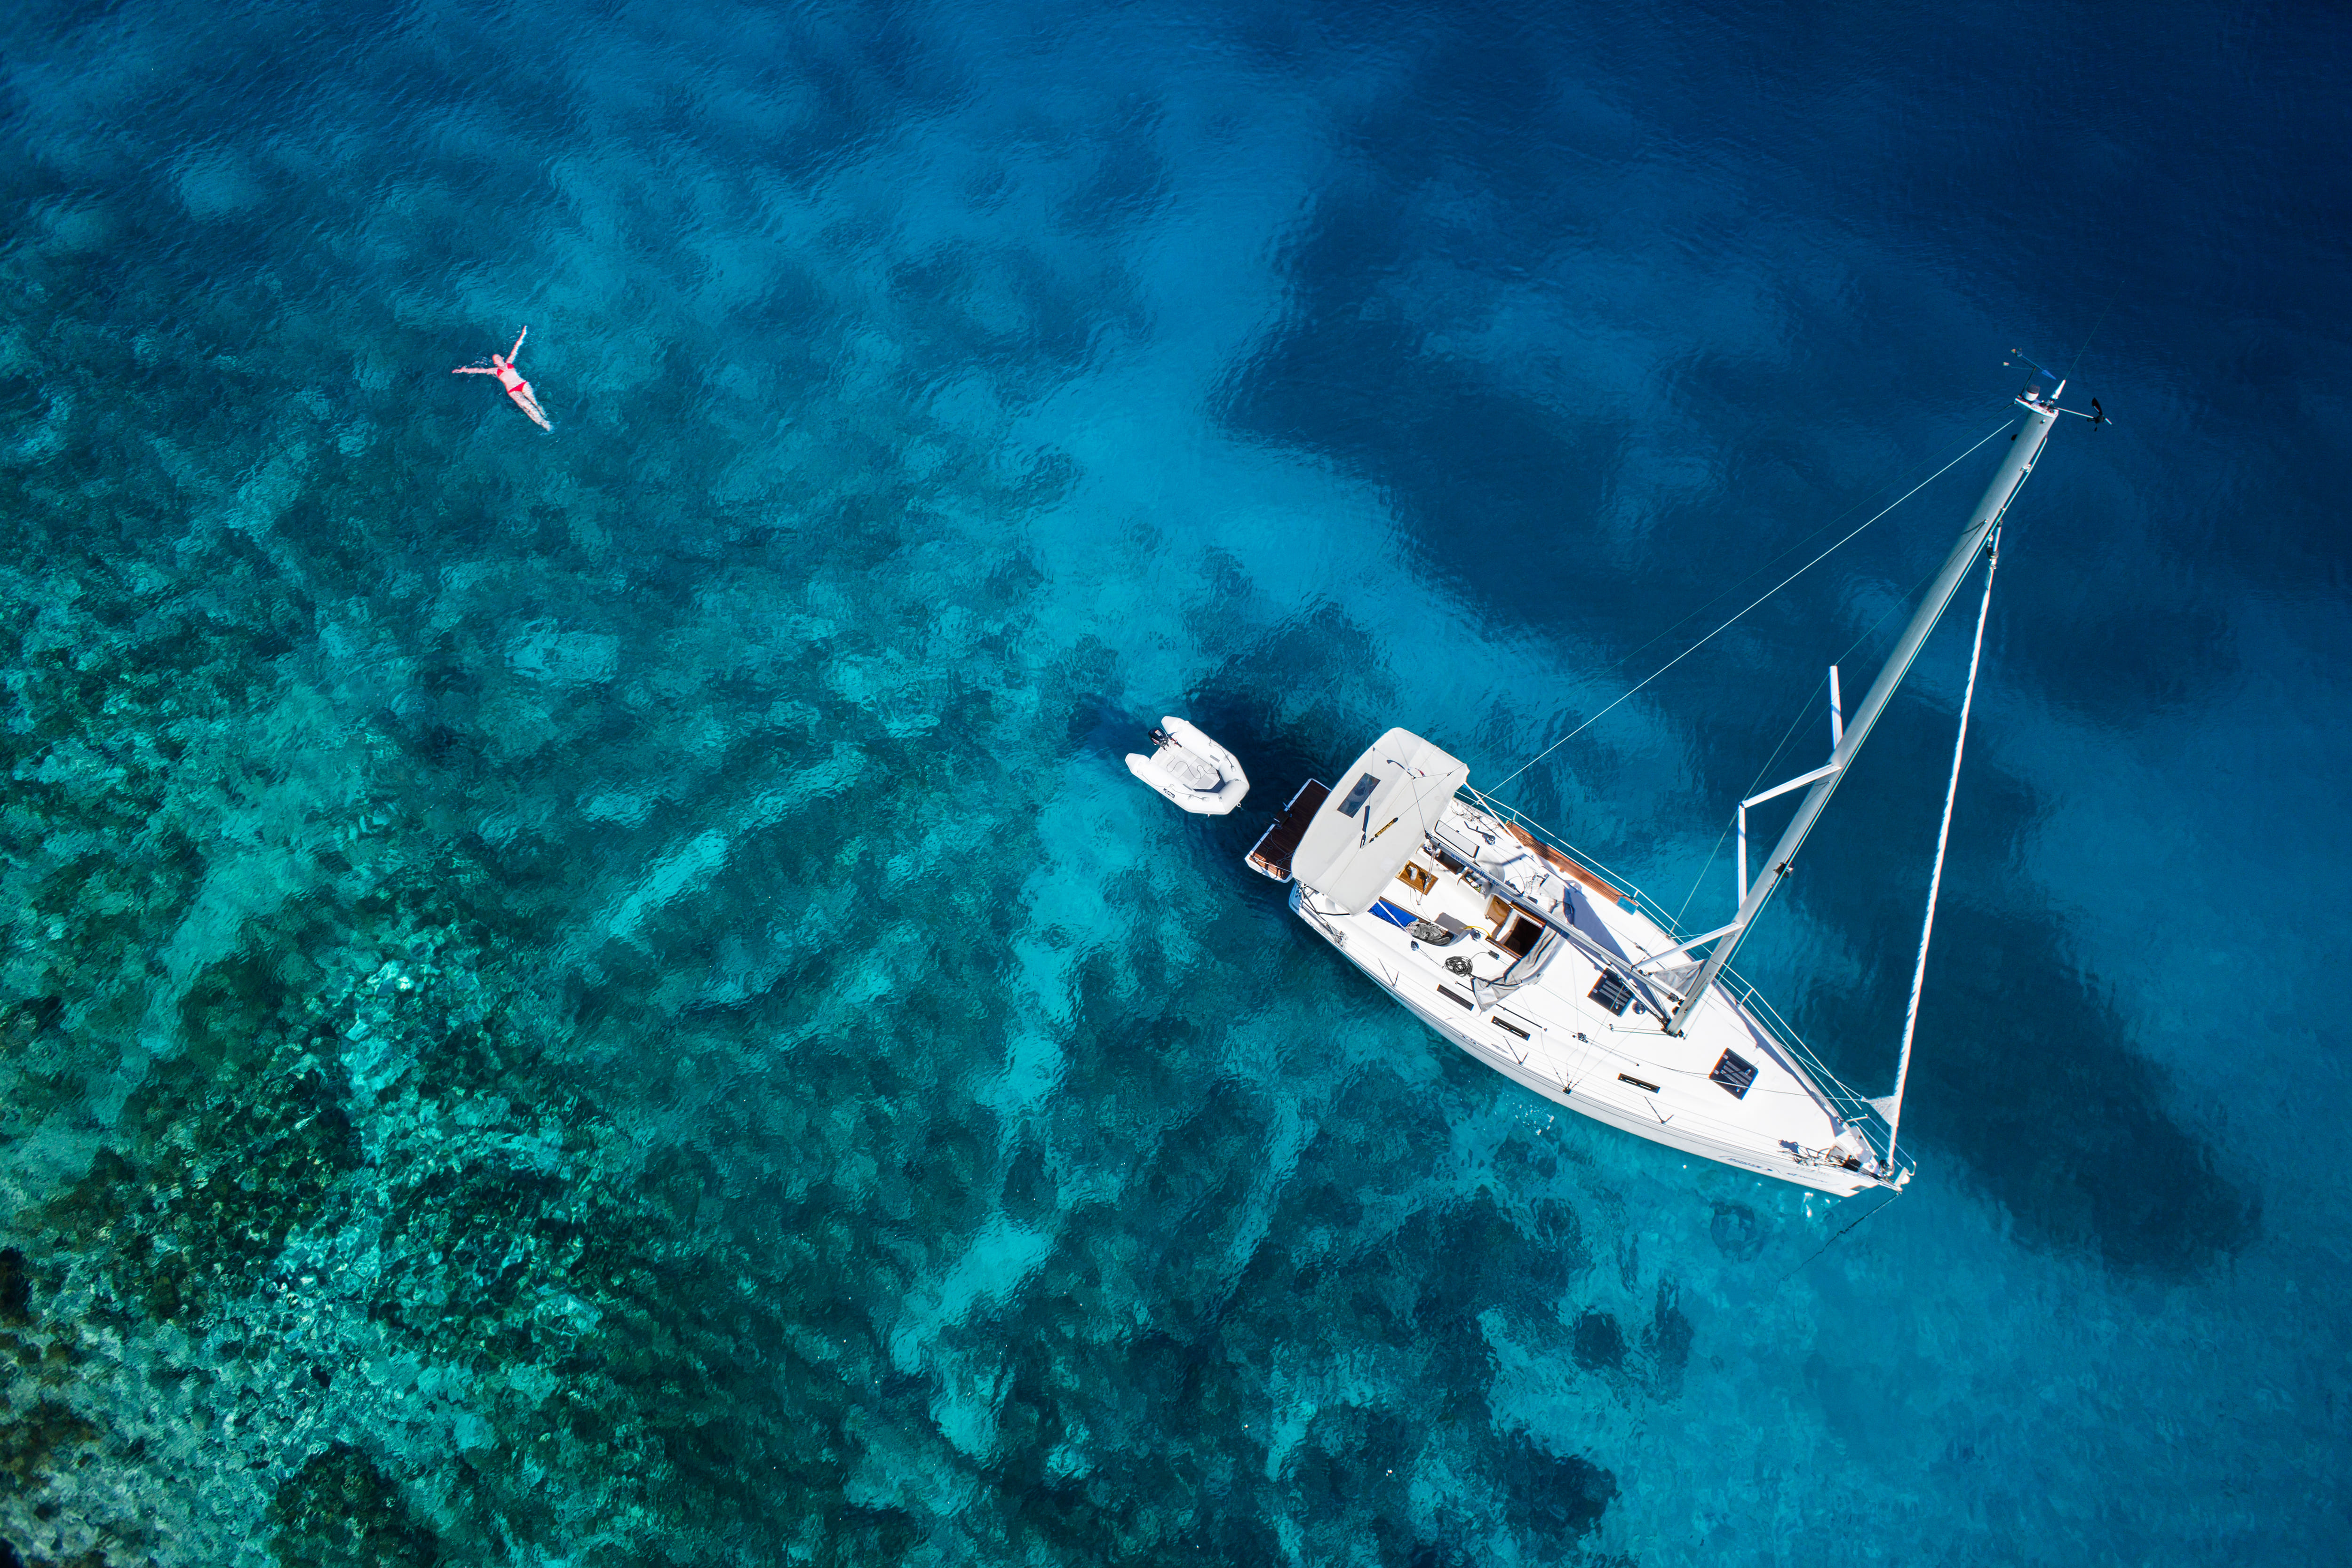 Why do I choose yachting as a style of vacation?